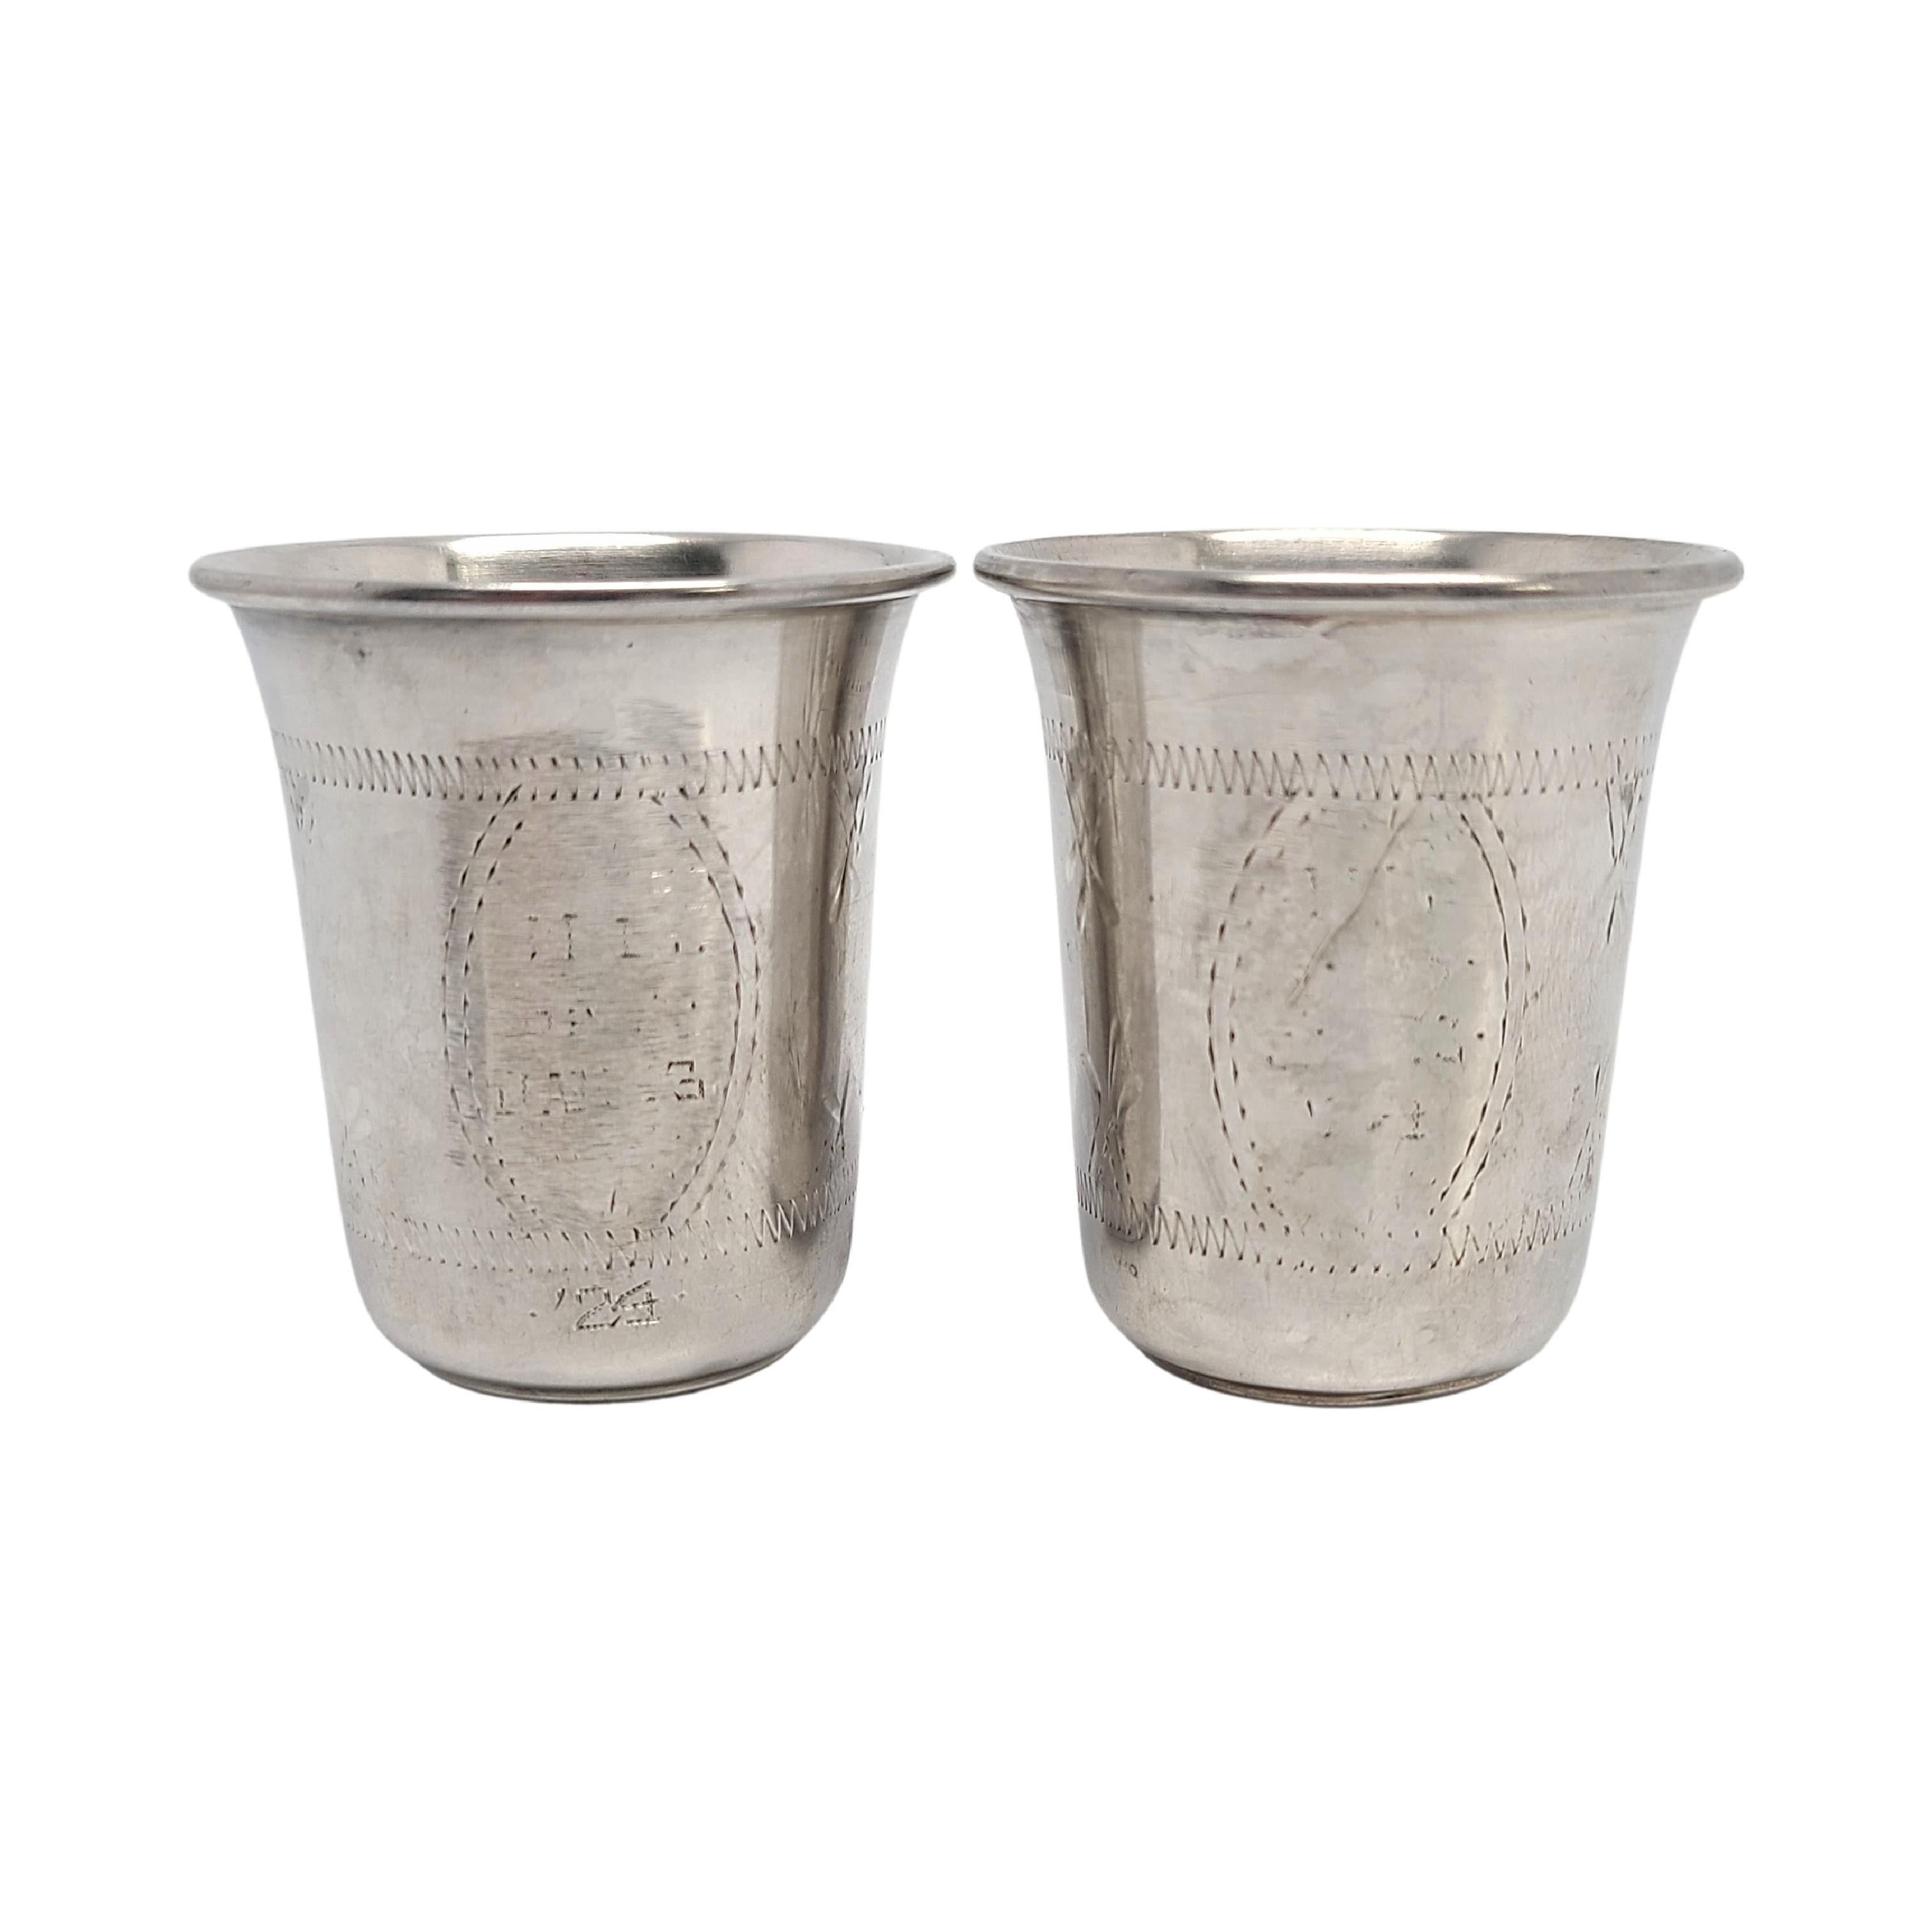 Set of 2 sterling silver kiddush cups.

Beautiful bright cut etched design featuring the Star of David. One panel looks like an engraving has worn off.

Each cup measures 1 3/4